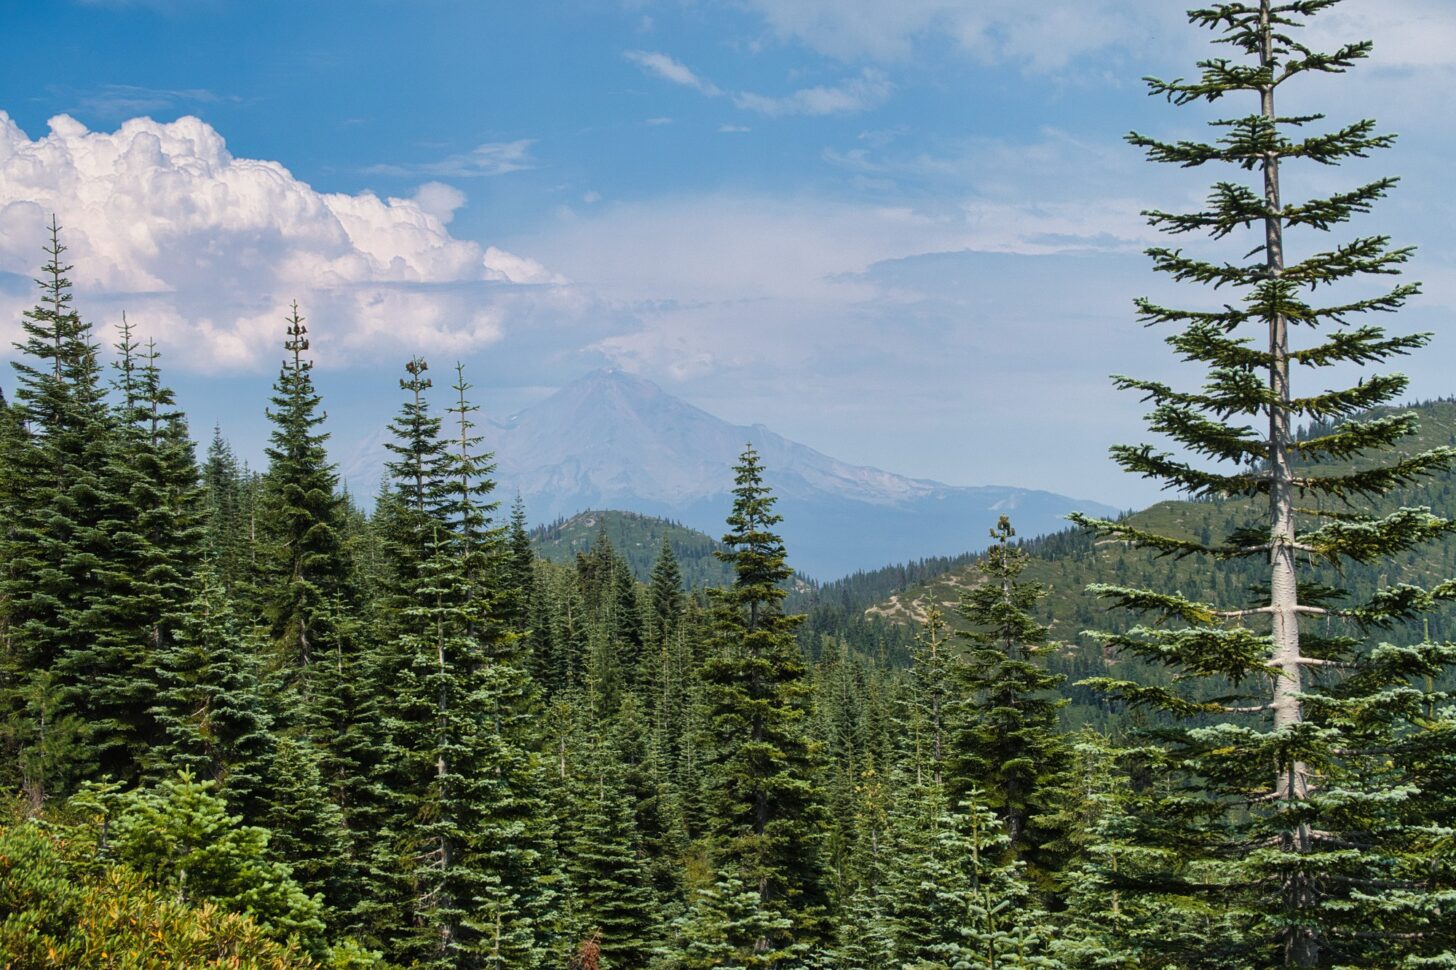 a tall mountain is just barely visible in the distance beyond a forest of fir trees